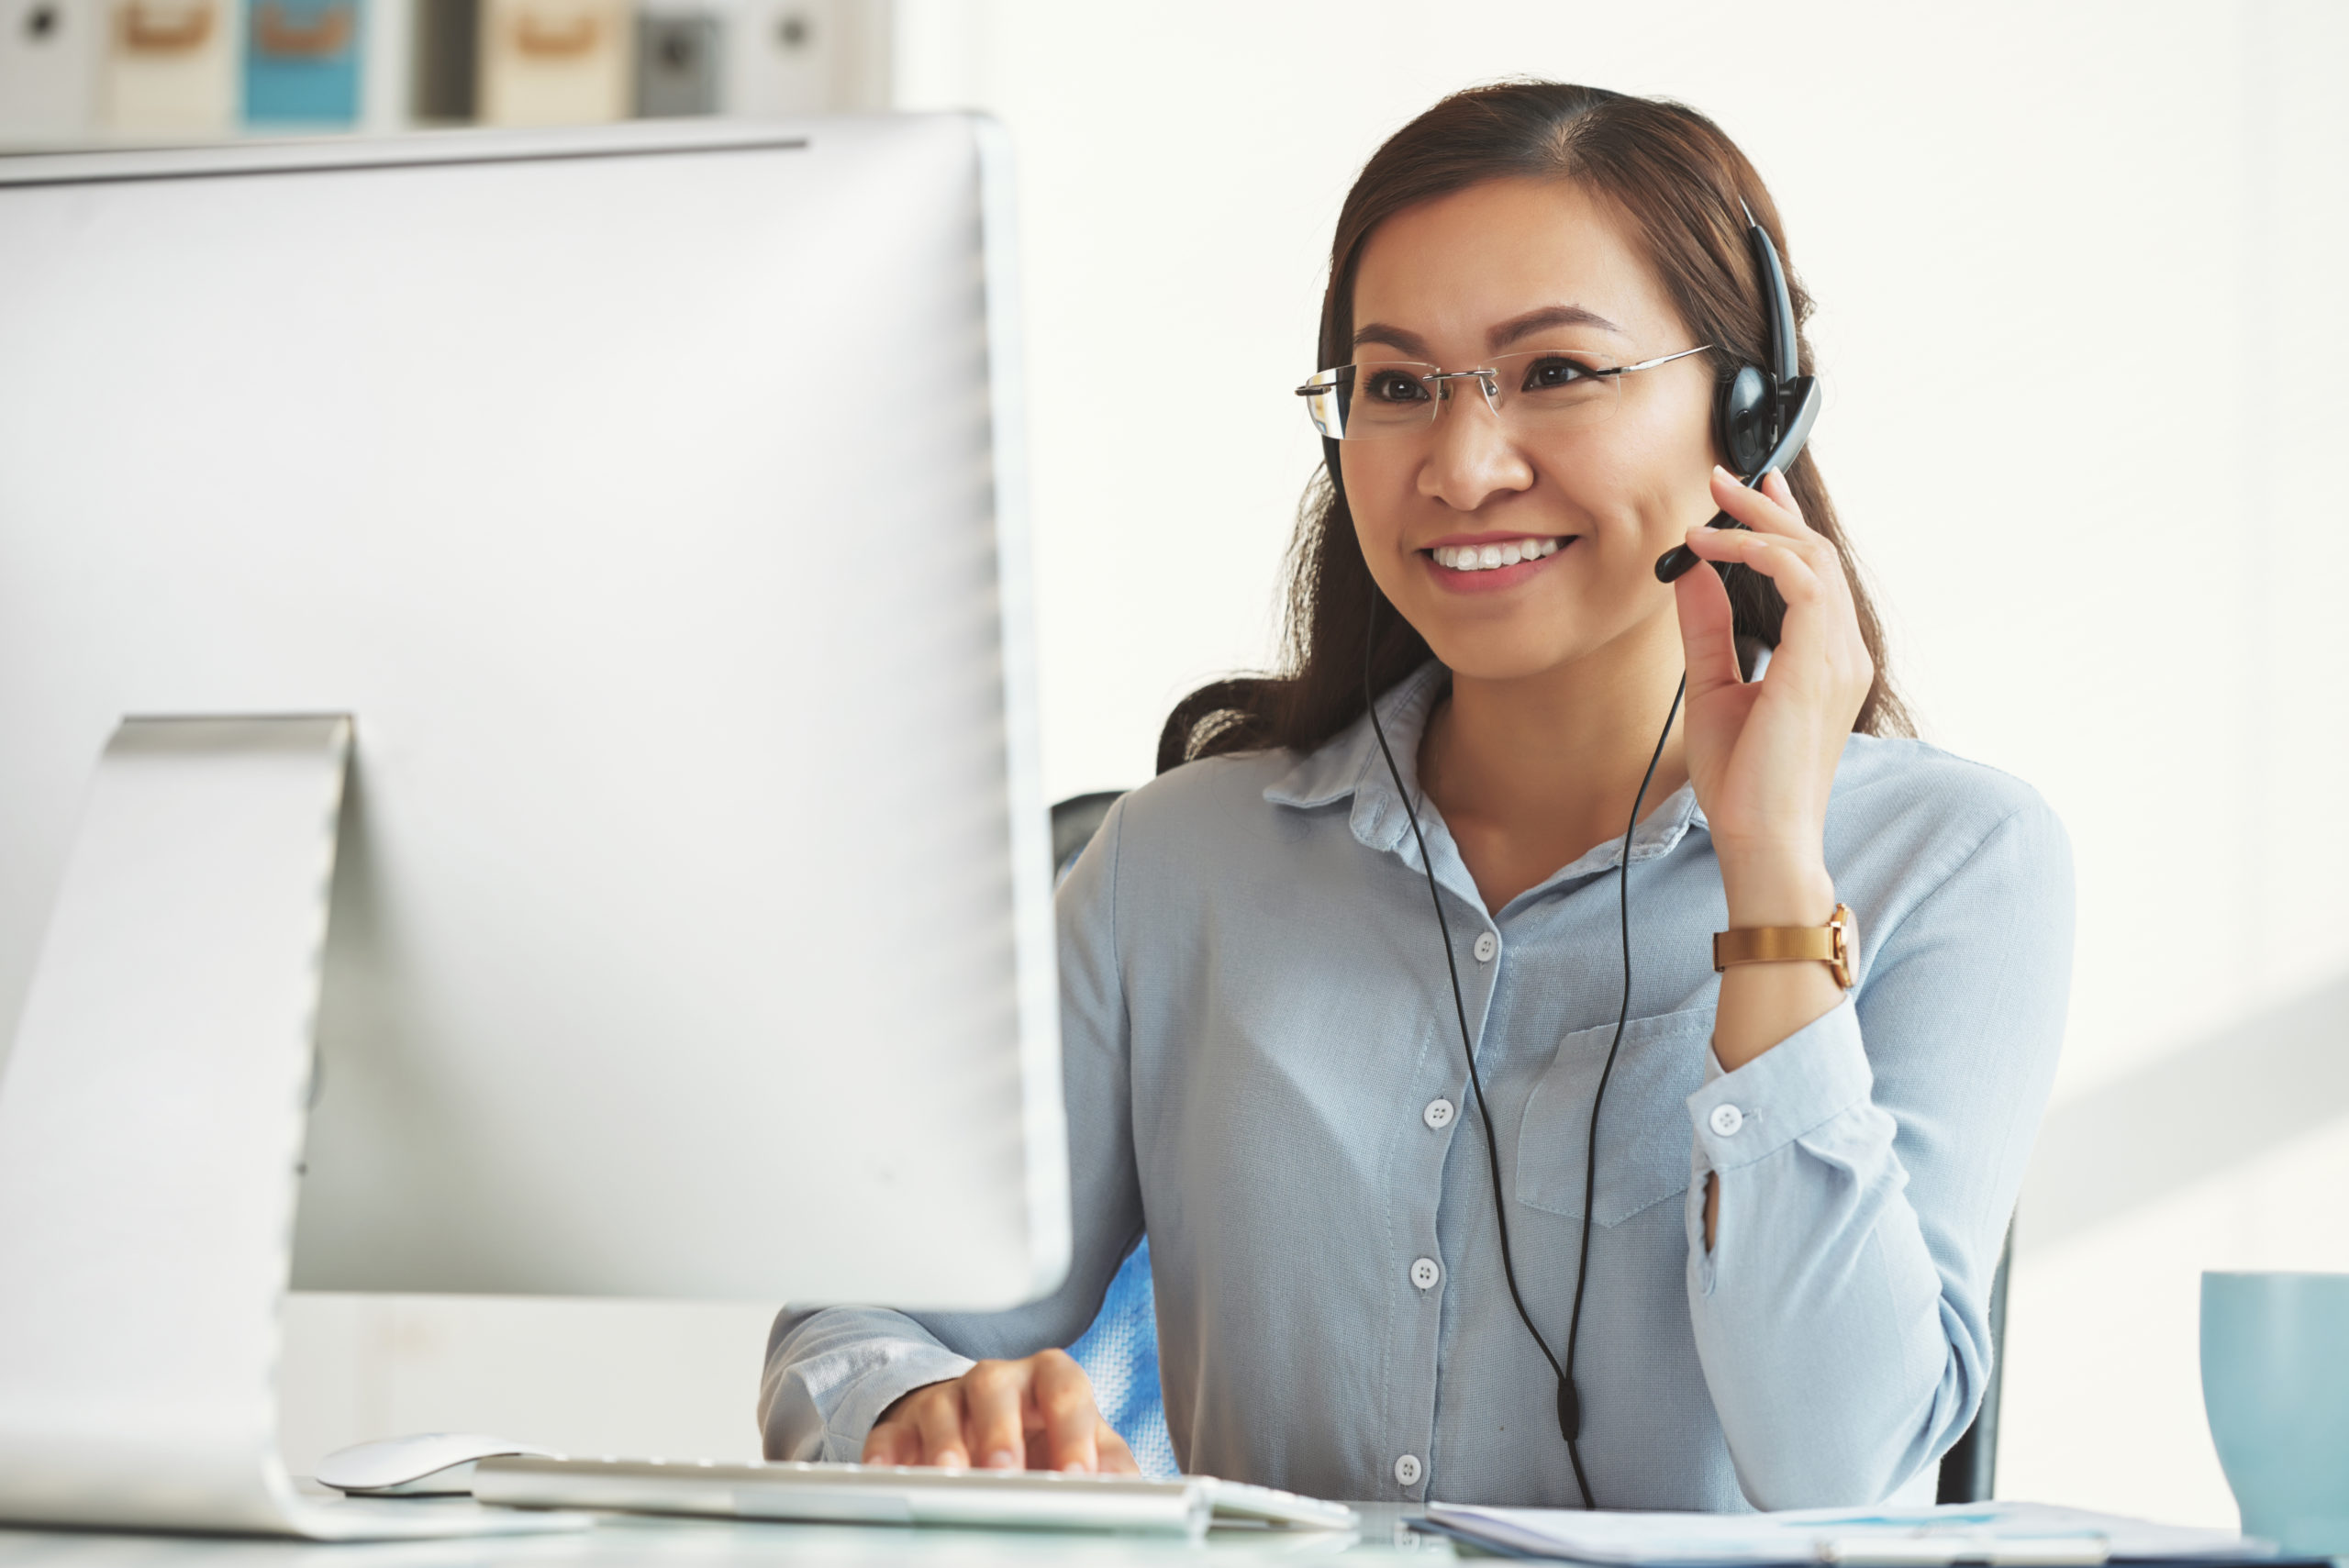 Call Center Technology Conundrum: The Future is Flexibility